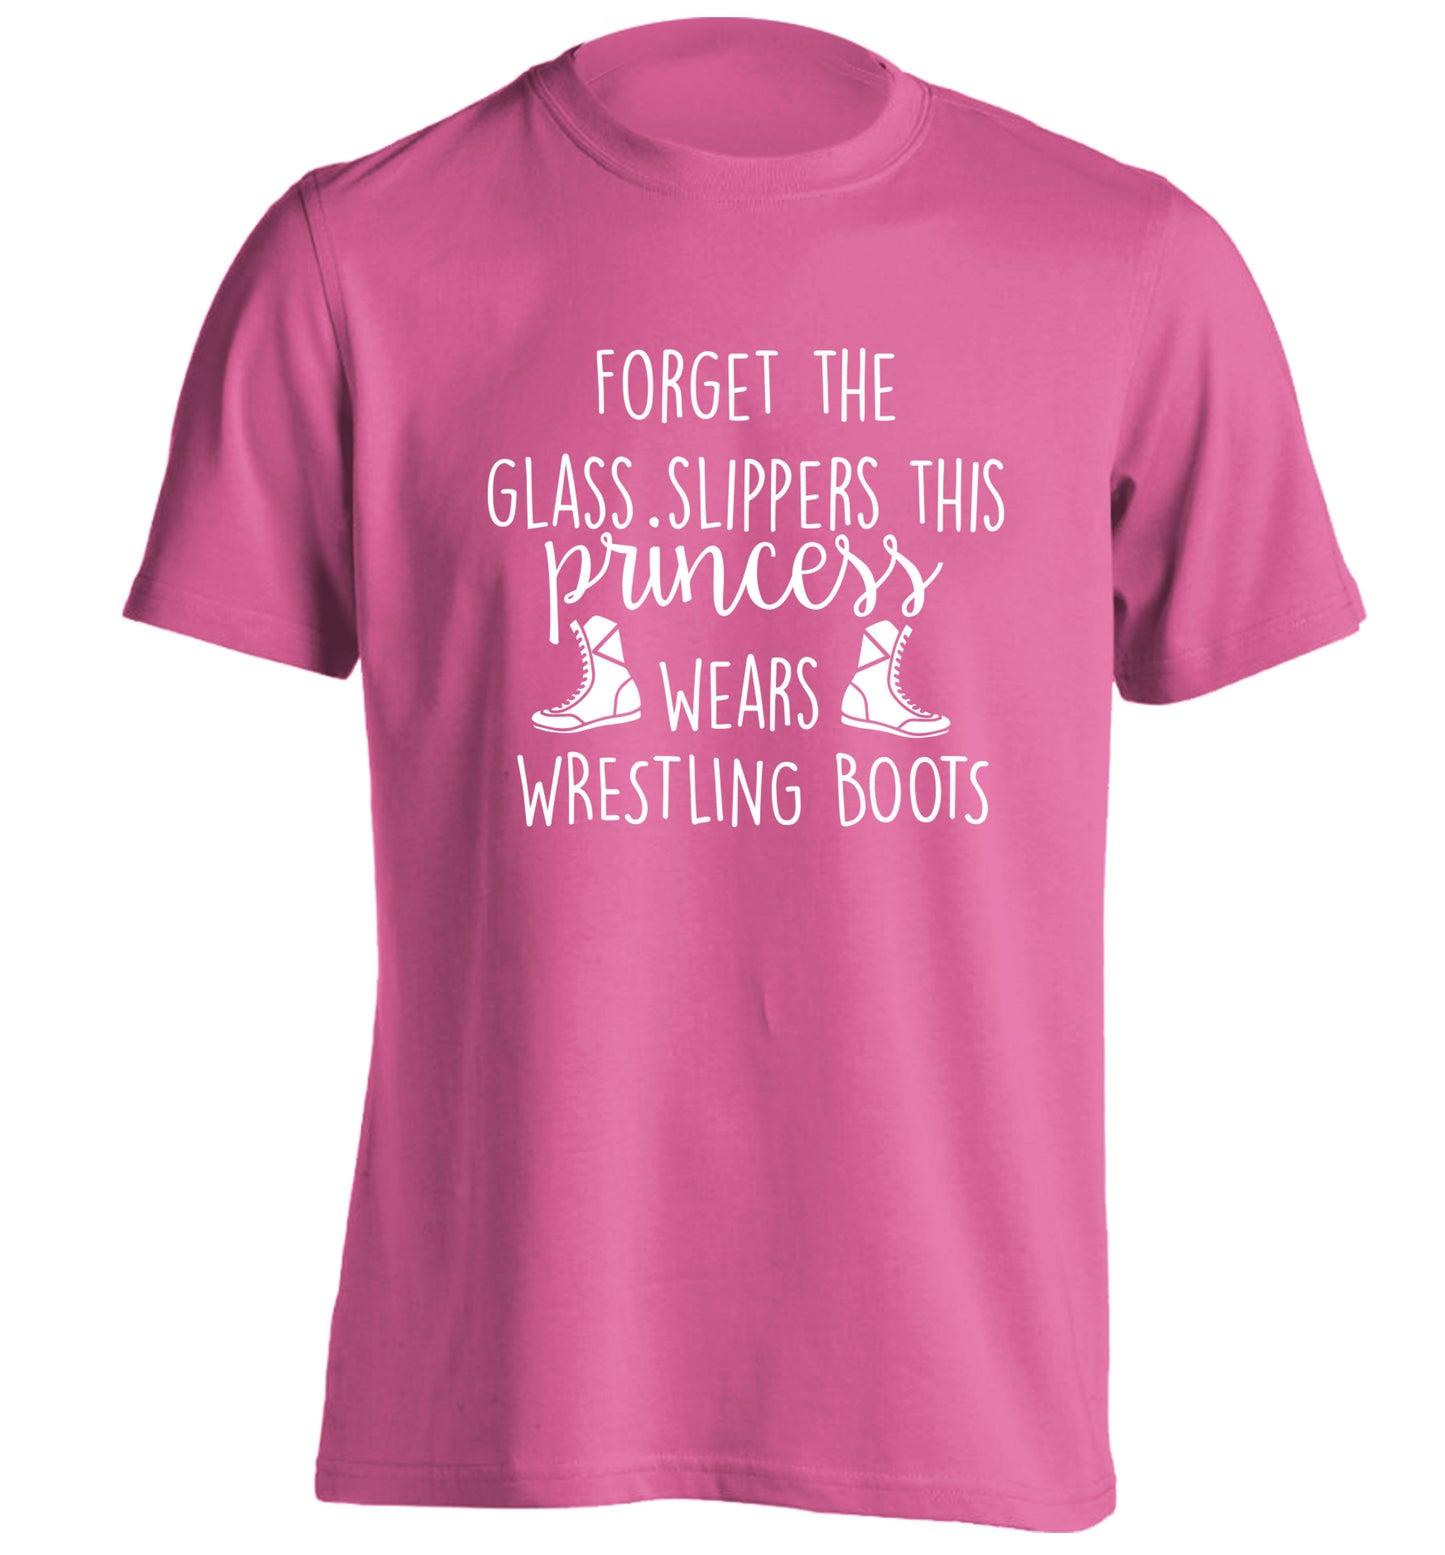 Forget the glass slippers this princess wears wrestling boots adults unisex pink Tshirt 2XL